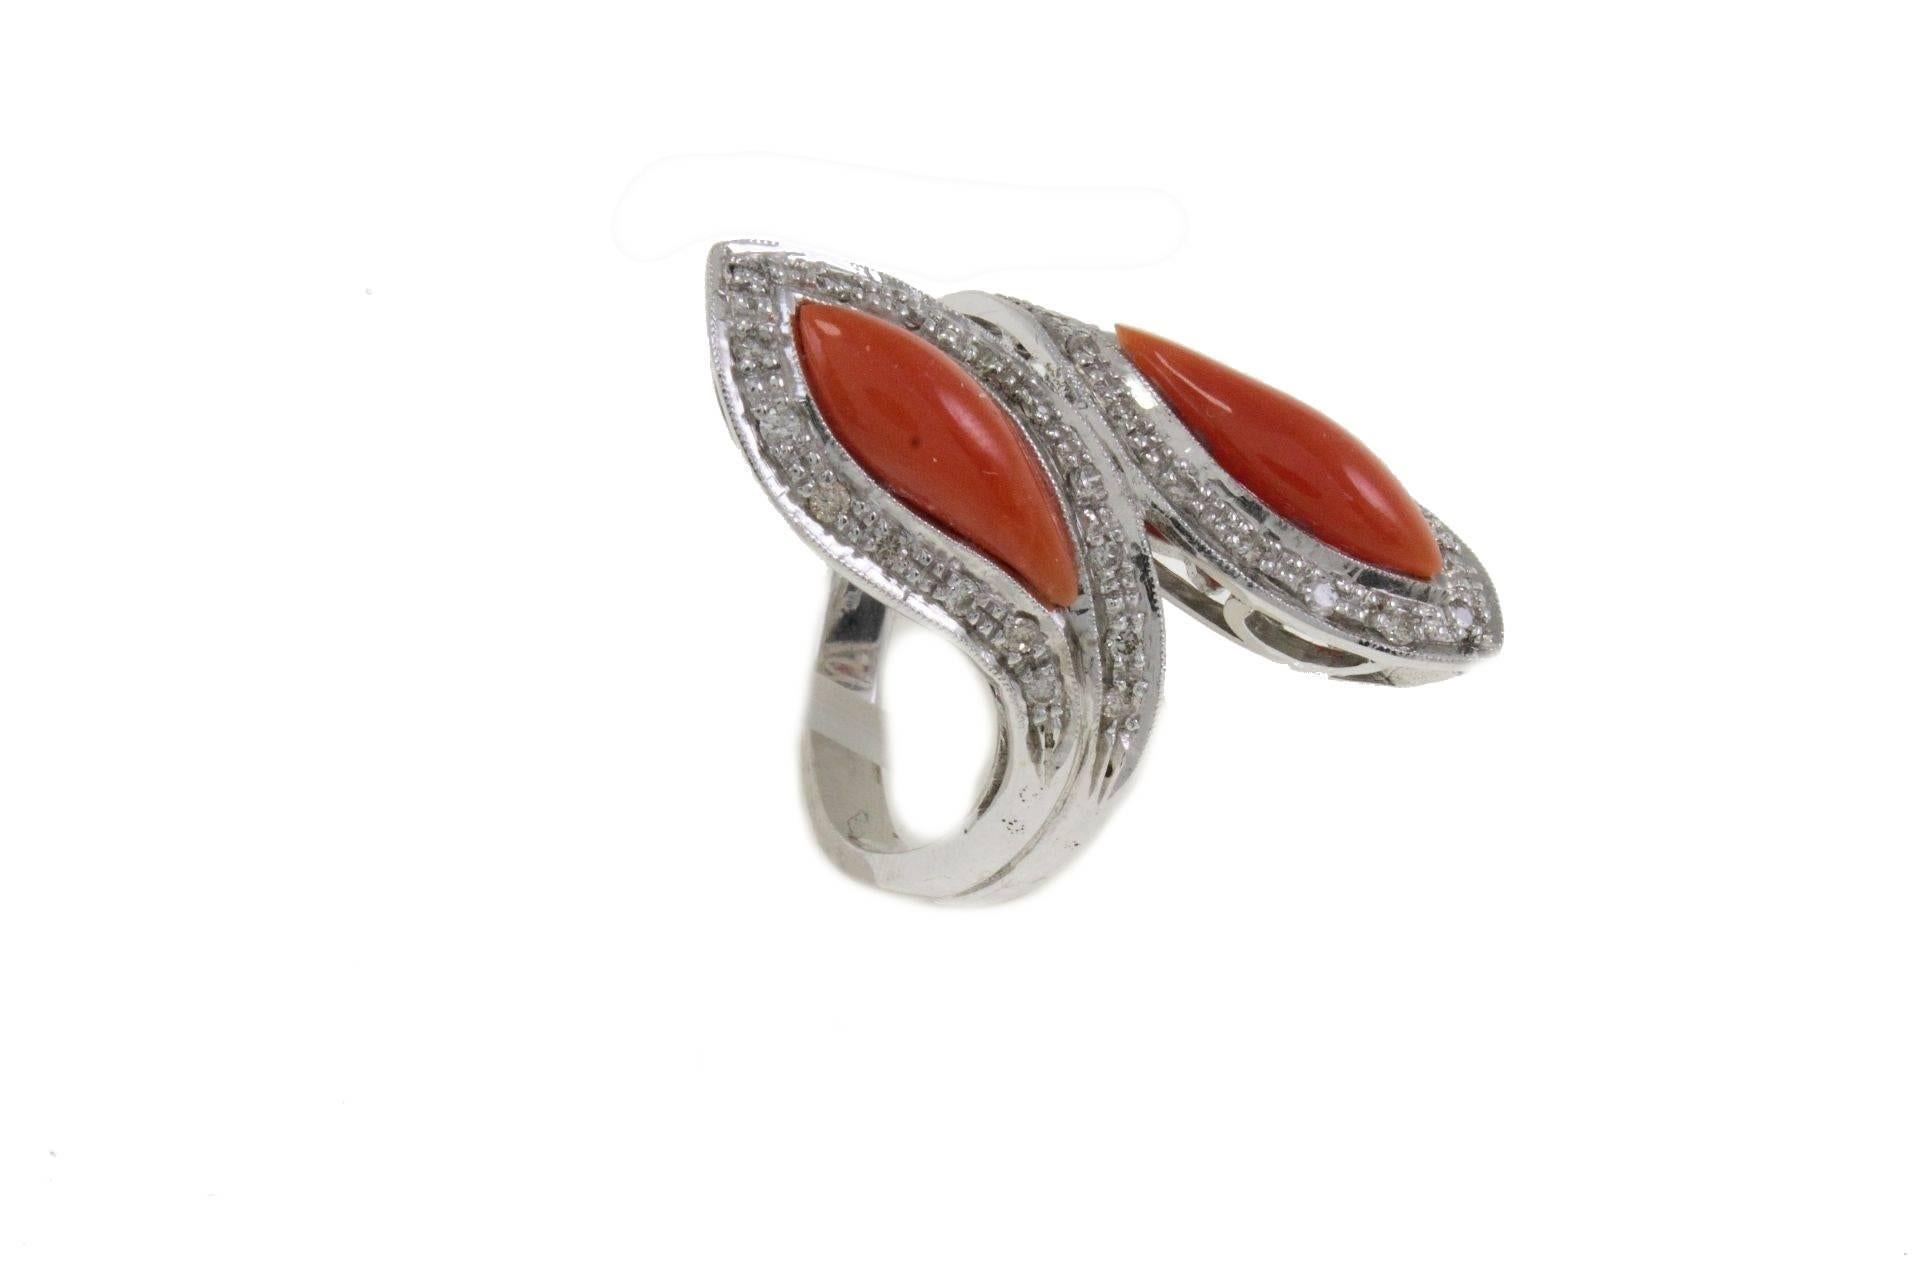 Fashion ring in 14k white gold mounted with white diamonds and coral.
Diamonds 0.47 kt
Coral 0.60 gr
Tot.Weight 10.90
R.F ghra

For any enquires, please contact the seller through the message center.